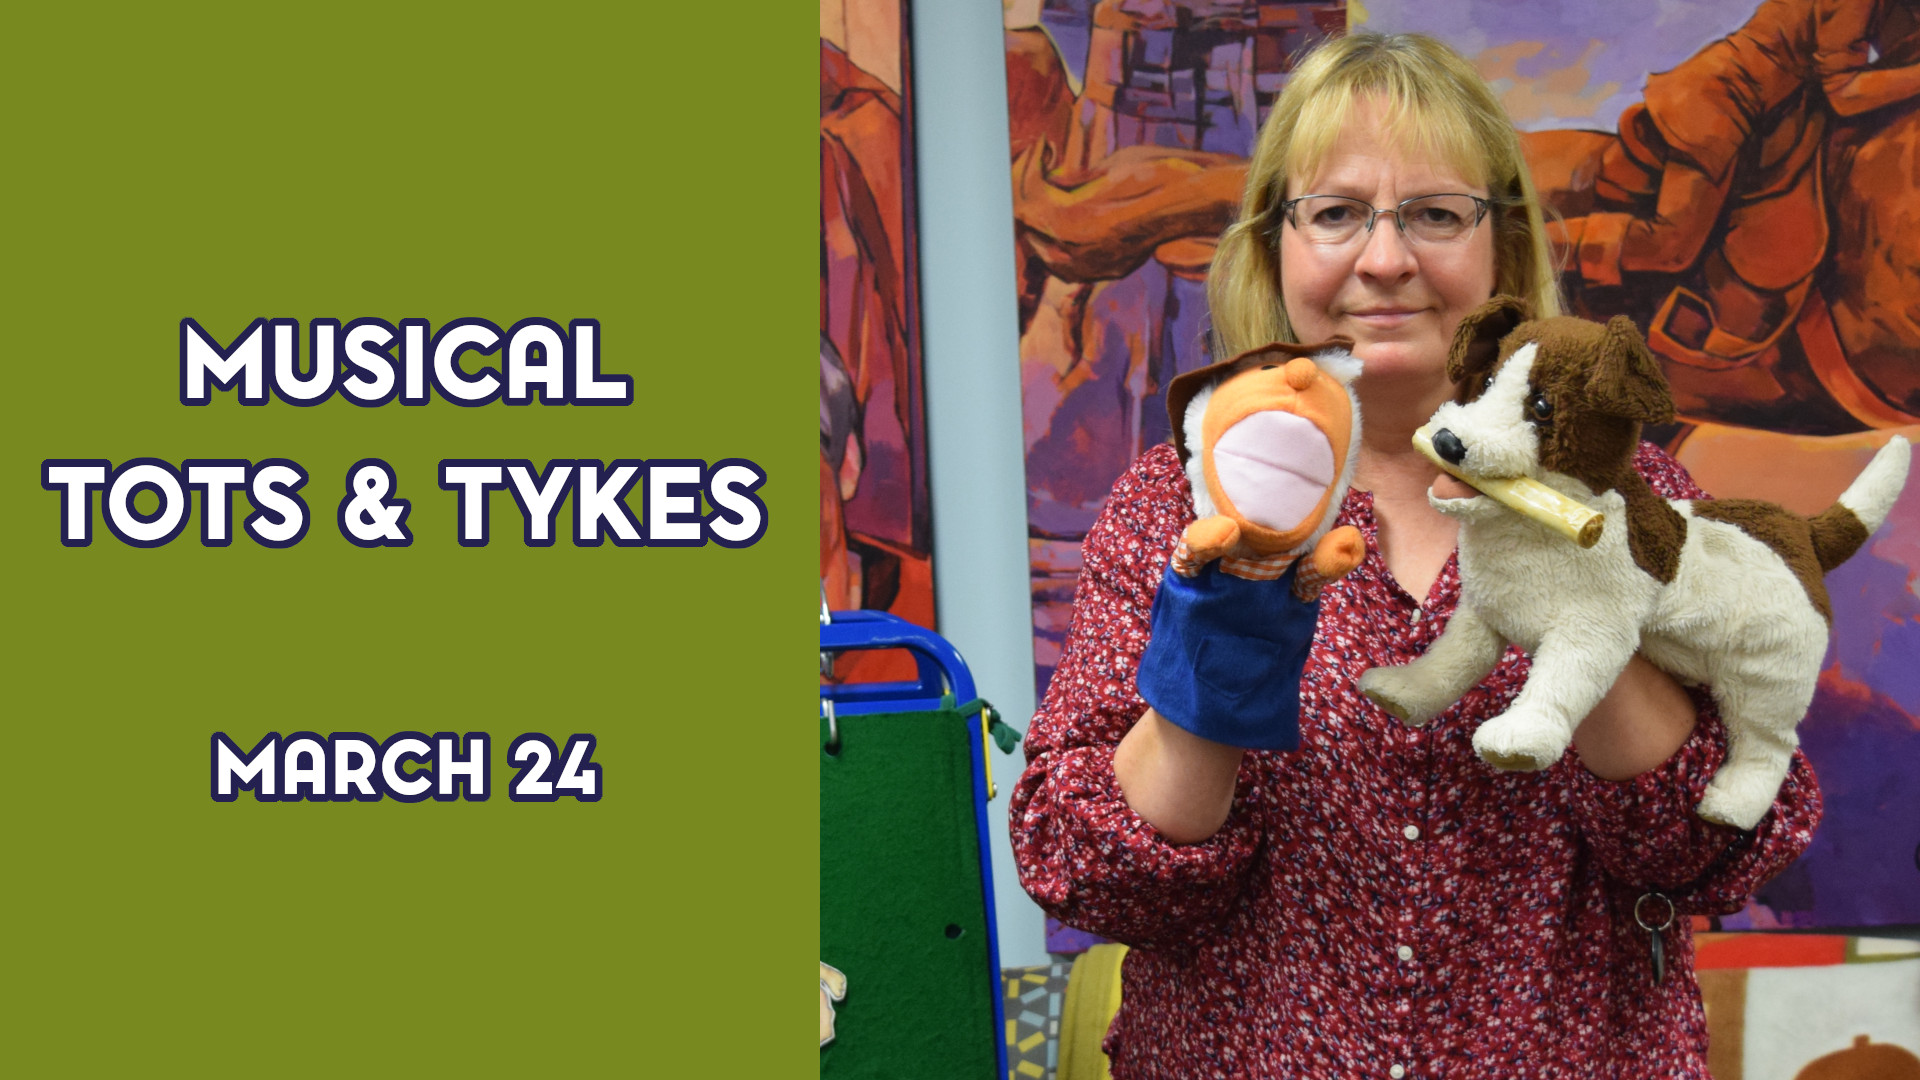 A woman holds stuffed animals next to the text "Musical Tots & Tykes March 24"